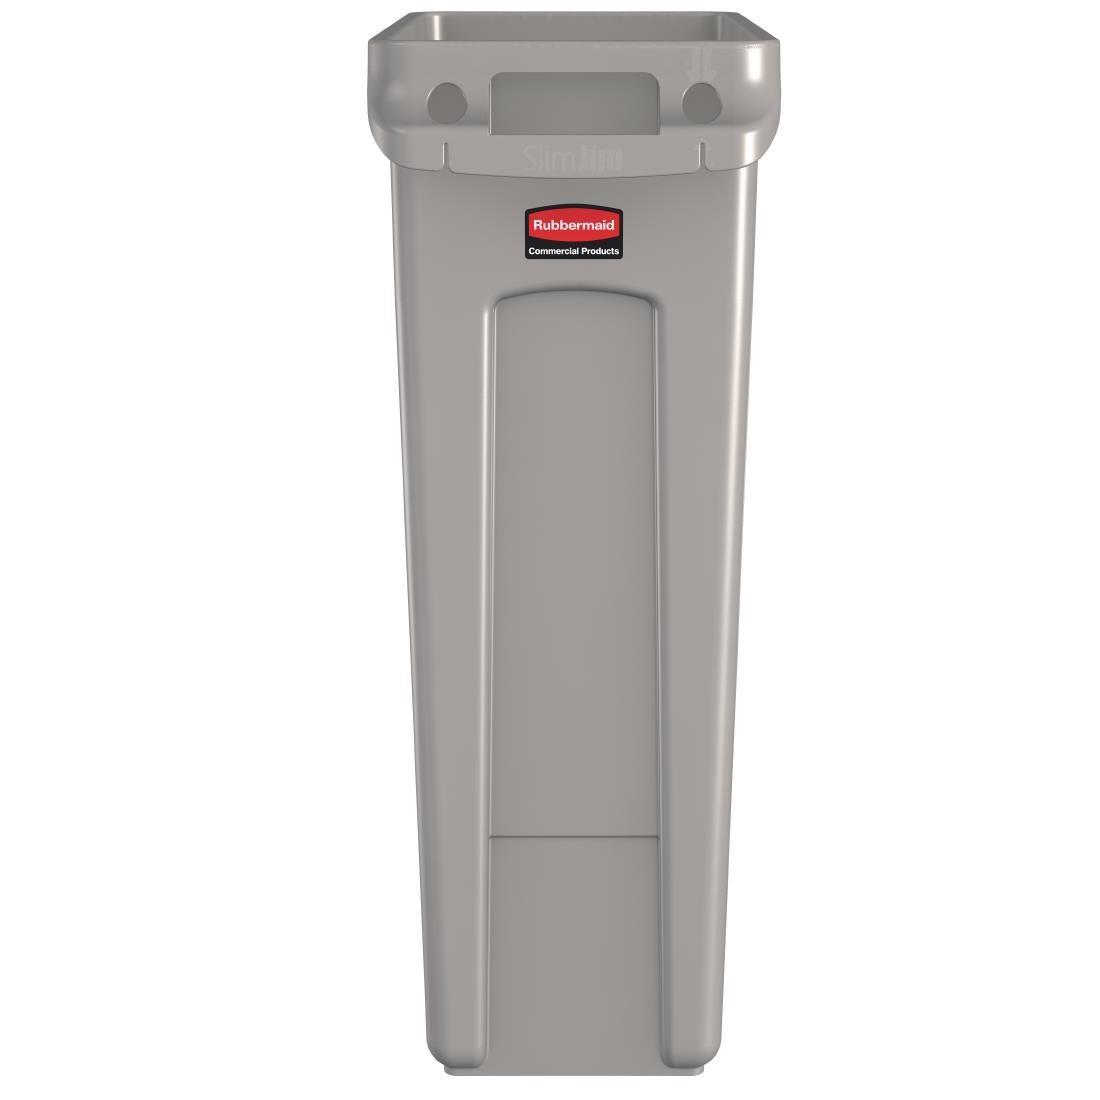 Rubbermaid Slim Jim Container With Venting Channels Grey 60Ltr - F603  - 2